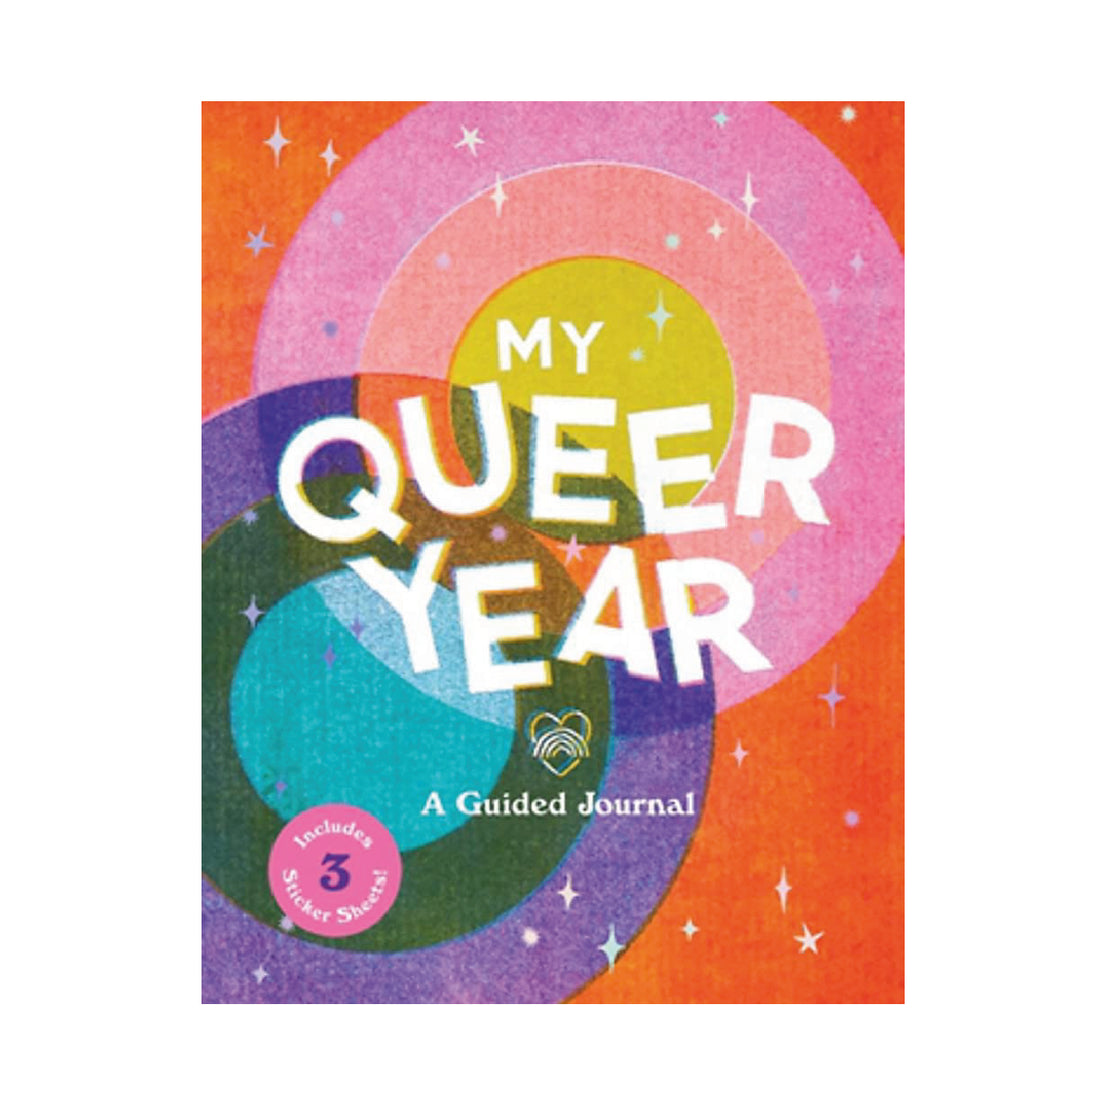 My Queer Year - A Guided Journal